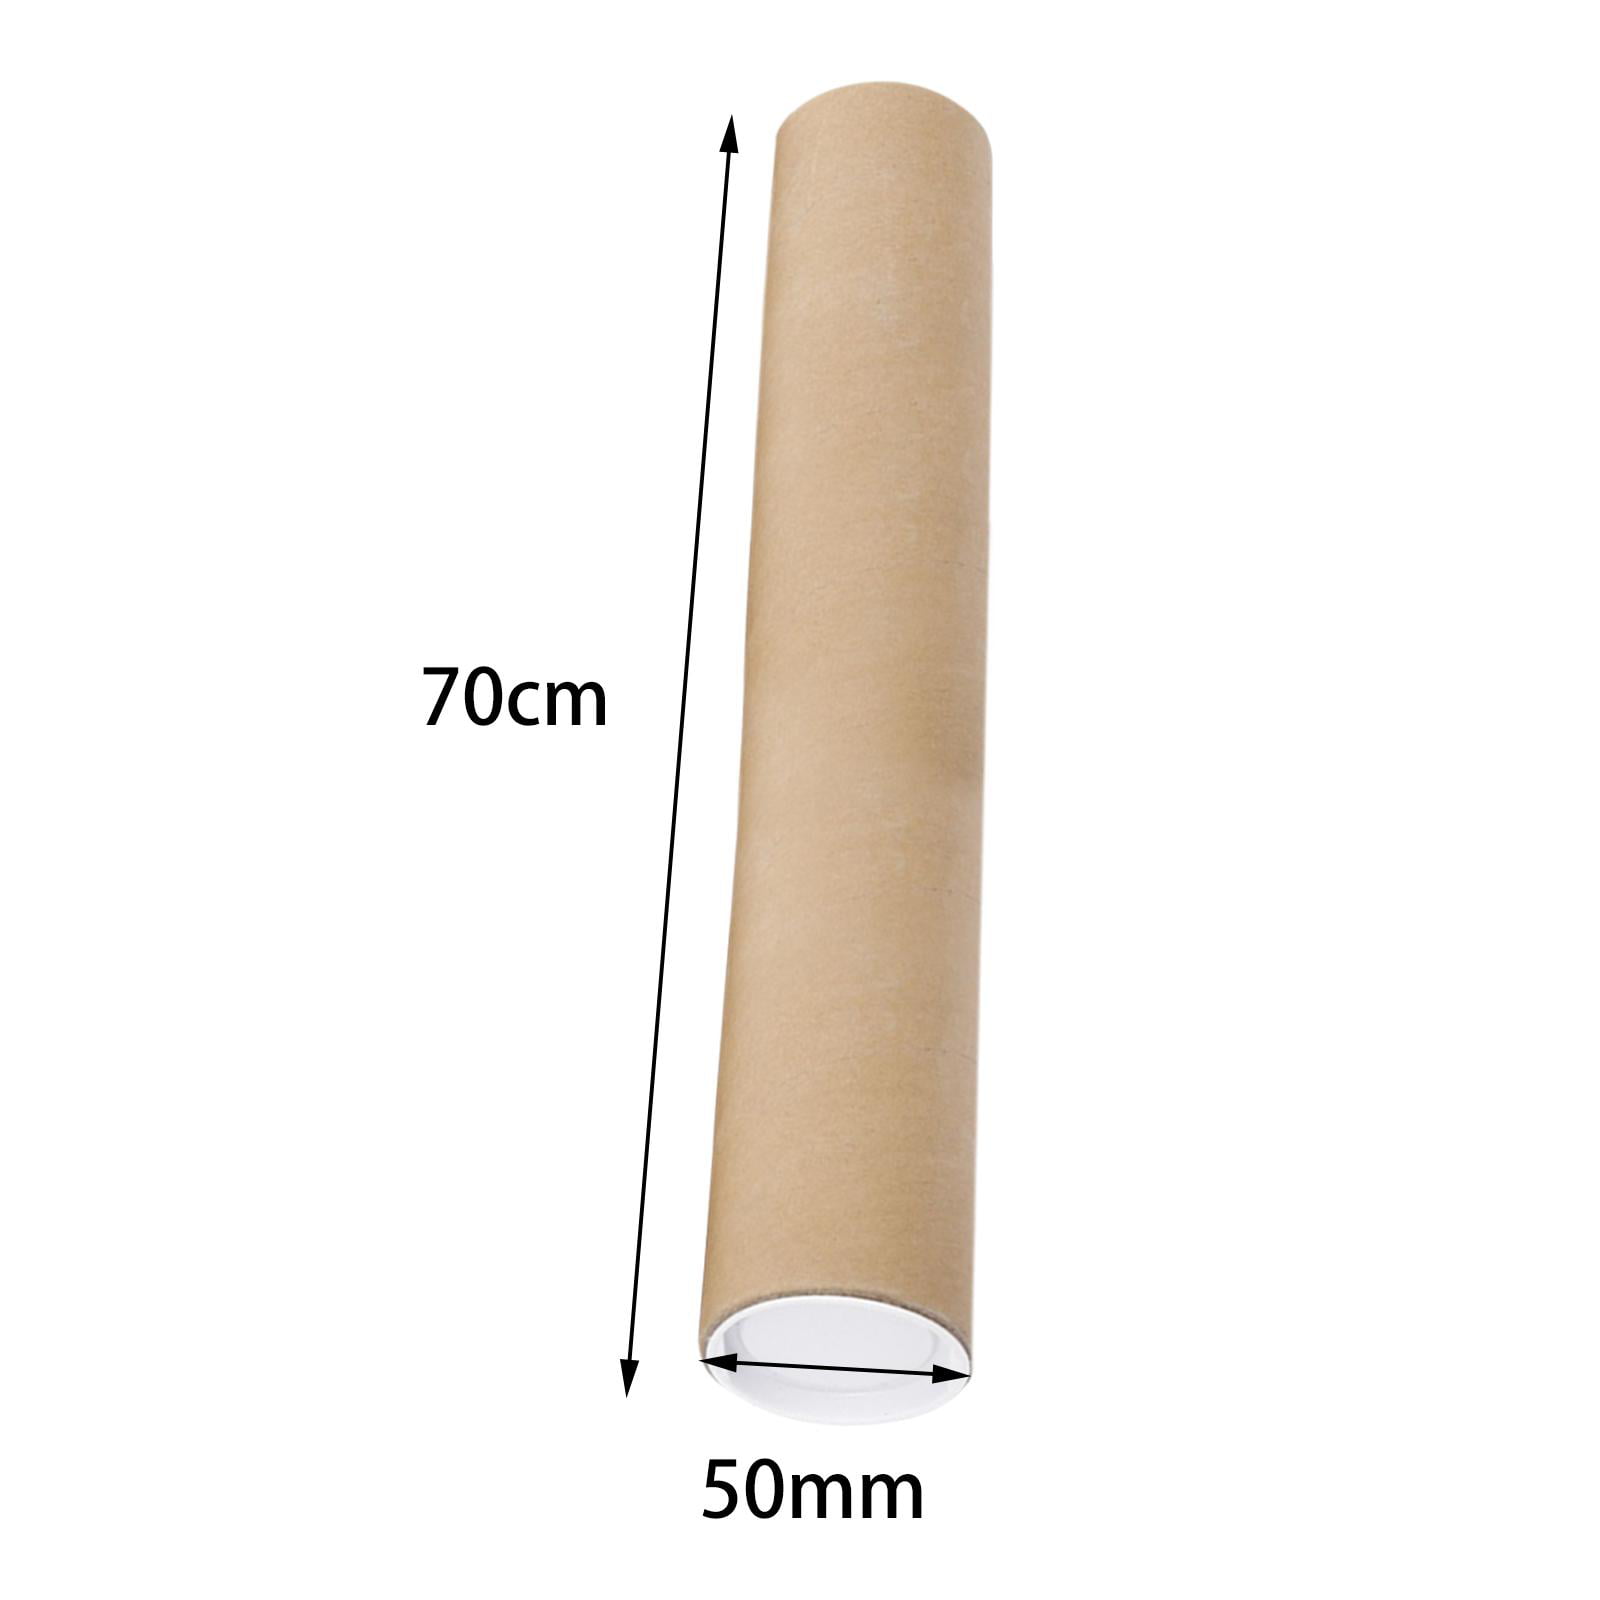 FOMIYES Pull-Out Poster Tube B00f0seh38 Poster Tubes for Storage Mailing  Tubes Telescoping Calligraphy Tube Packing Tubes Large Artwork Drawings